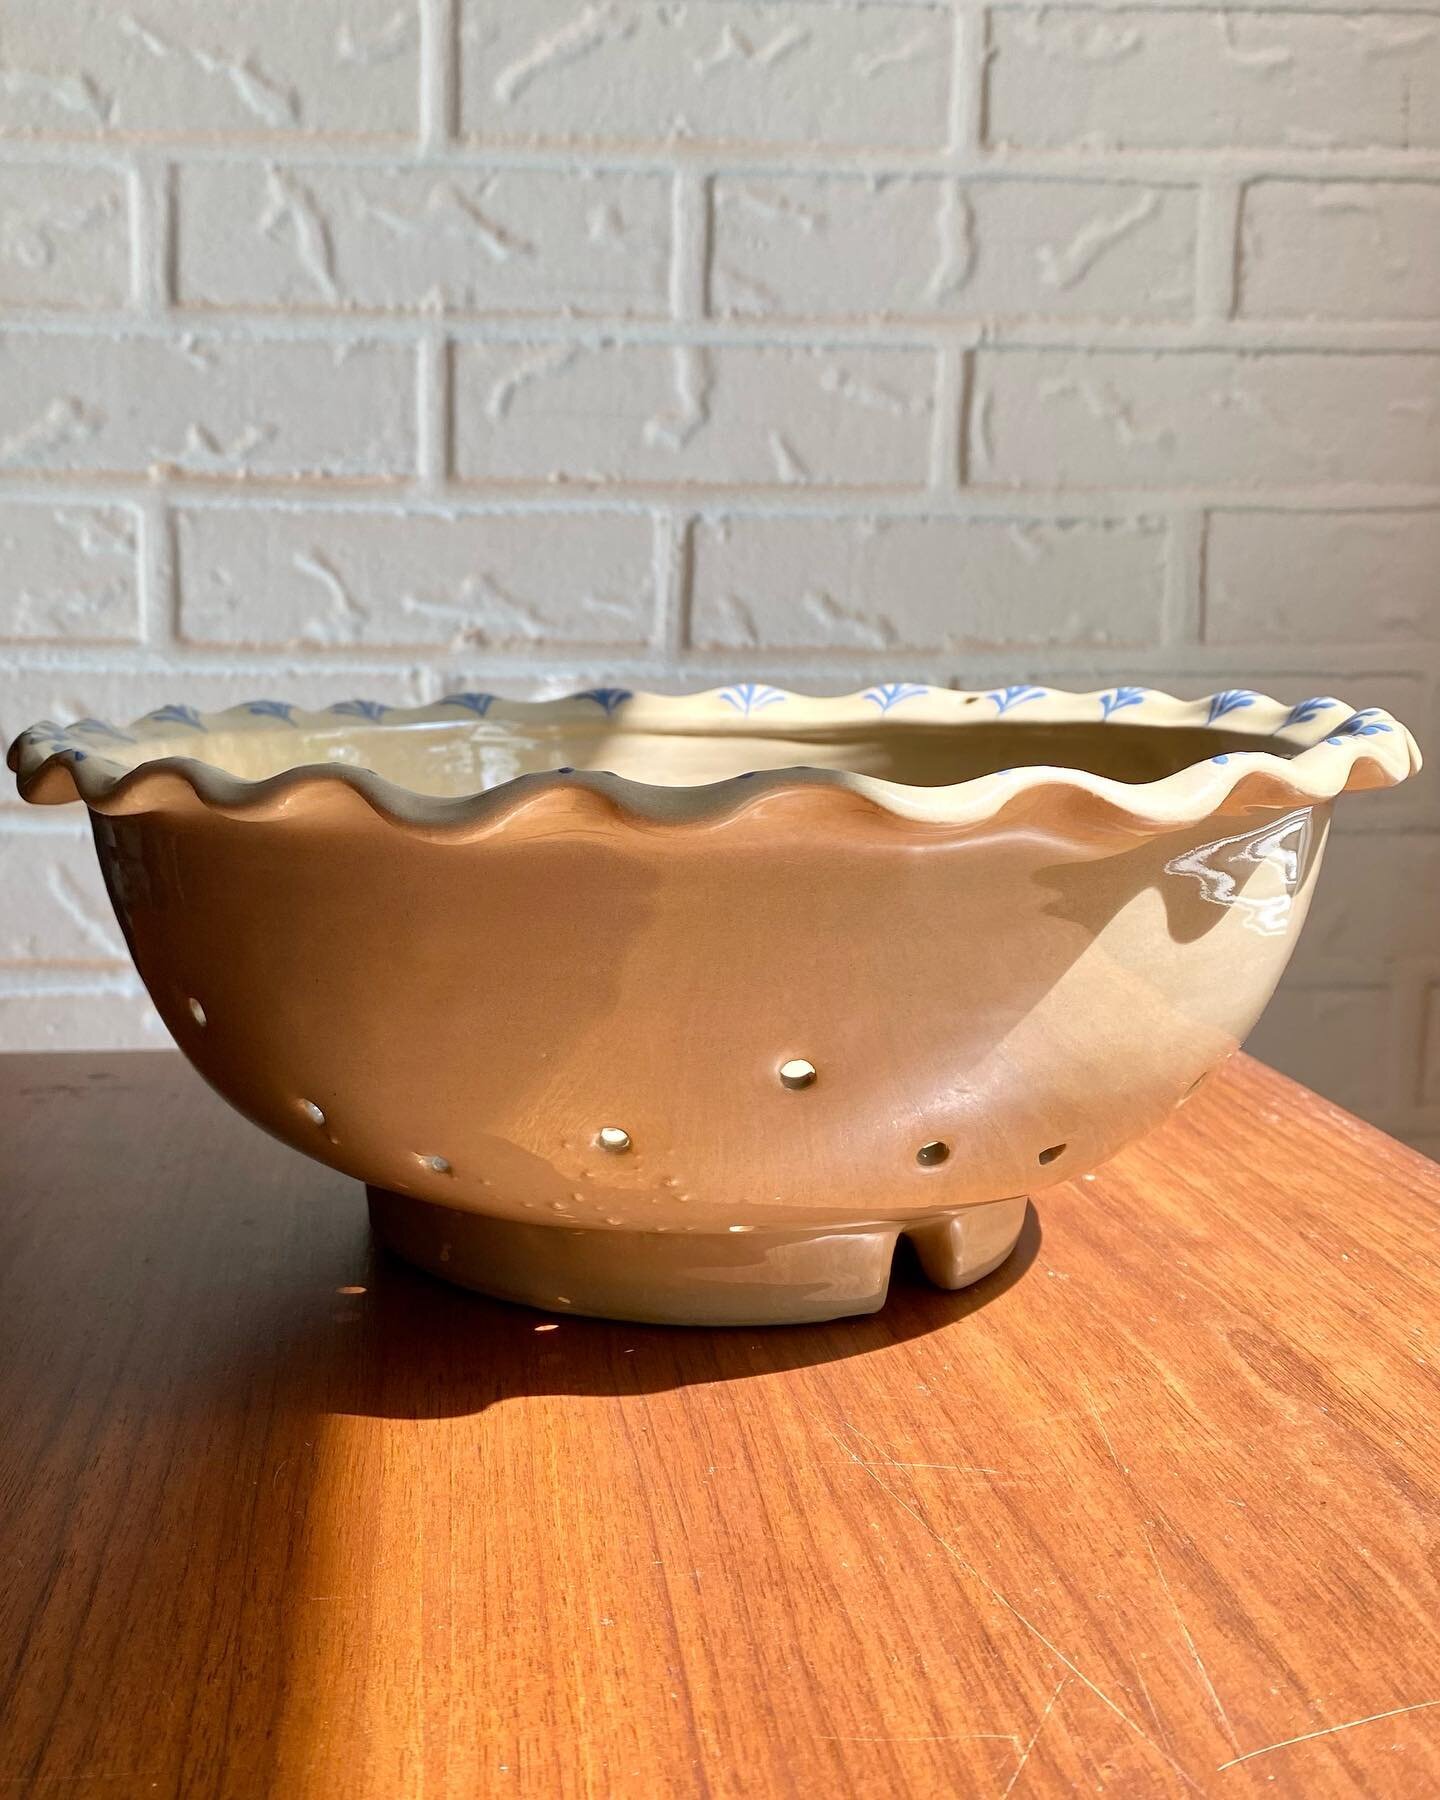 ✨FOR SALE:✨
I LOVE the ruffled edge and blue design details on this gorgeous stoneware colander/berry bowl/strainer by Hartstone company, made in USA. I looked up Hartstone&rsquo;s history and it&rsquo;s pretty interesting. Read their stuff is lead-f